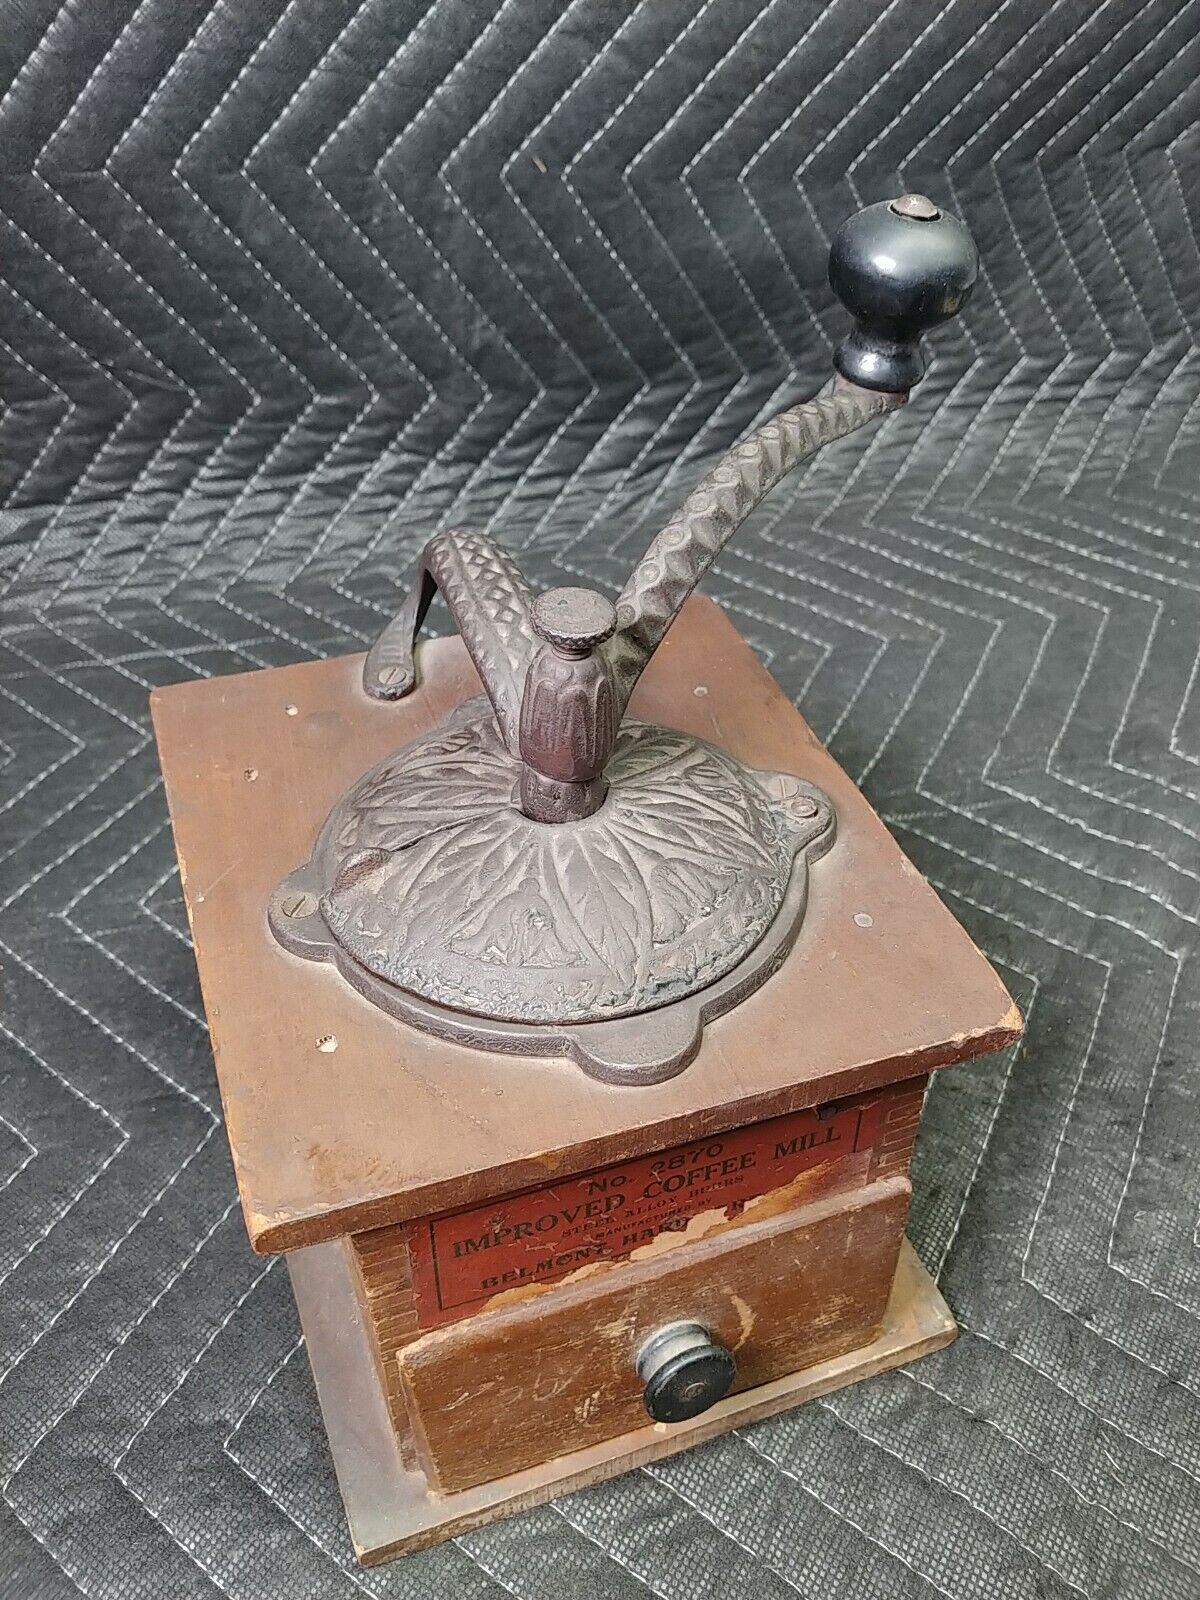 Antique Improved Coffee Mill Belmont Hardware Steel Alloy Buhrs 2870